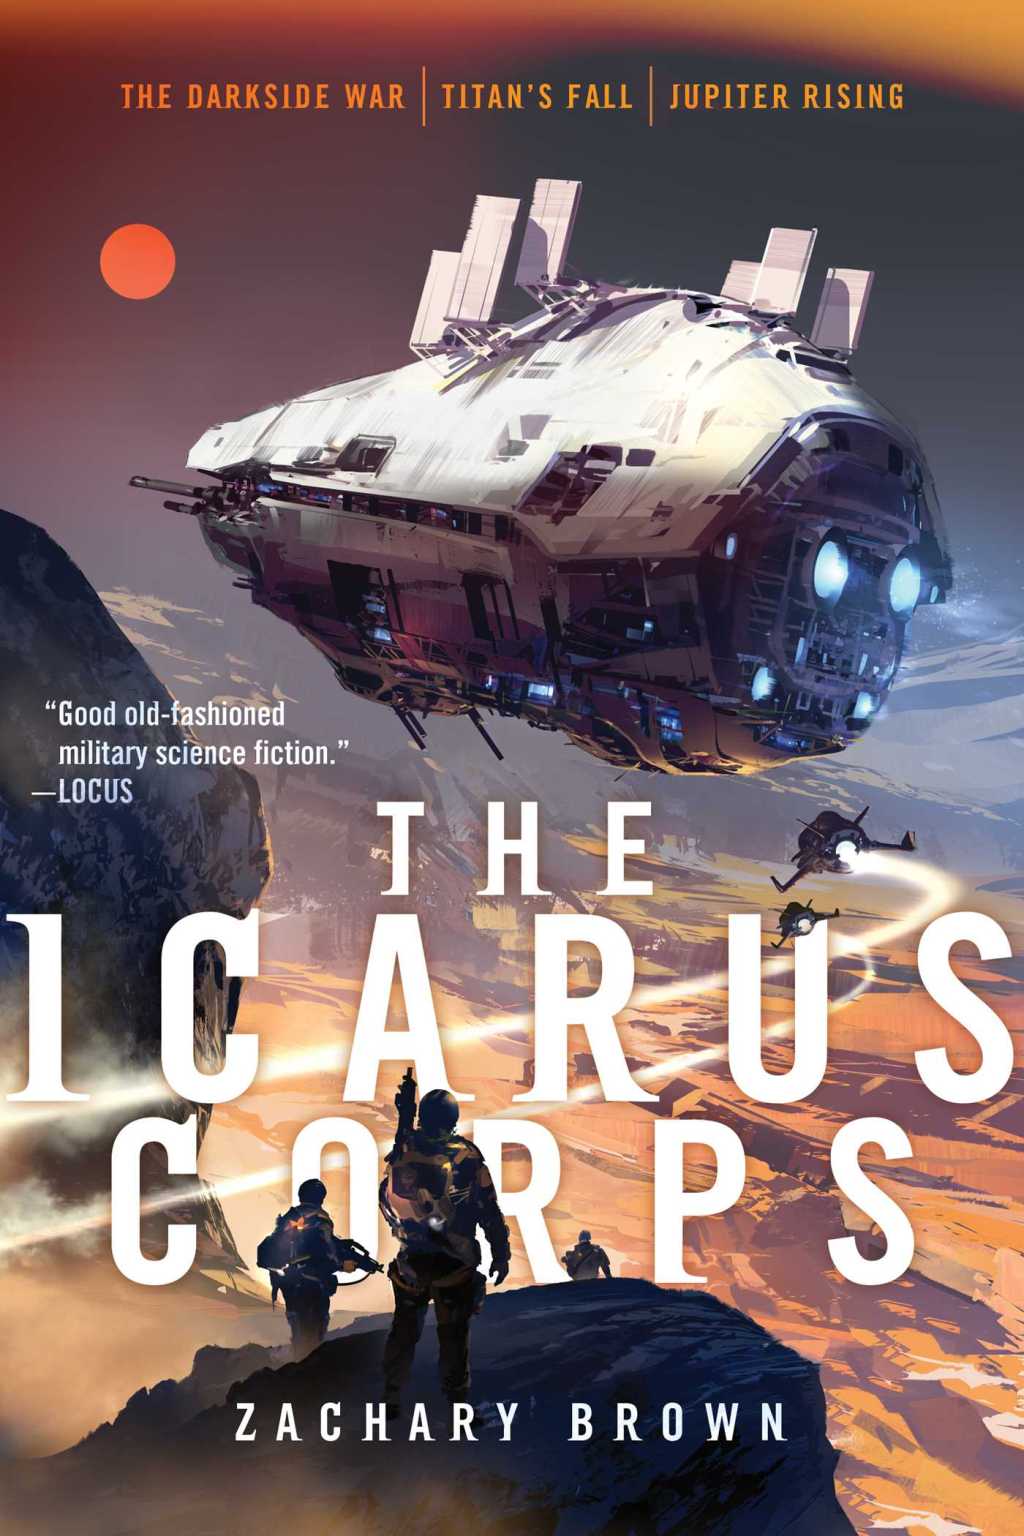 BOOK REVIEW: The Icarus Corps, by Zachary Brown